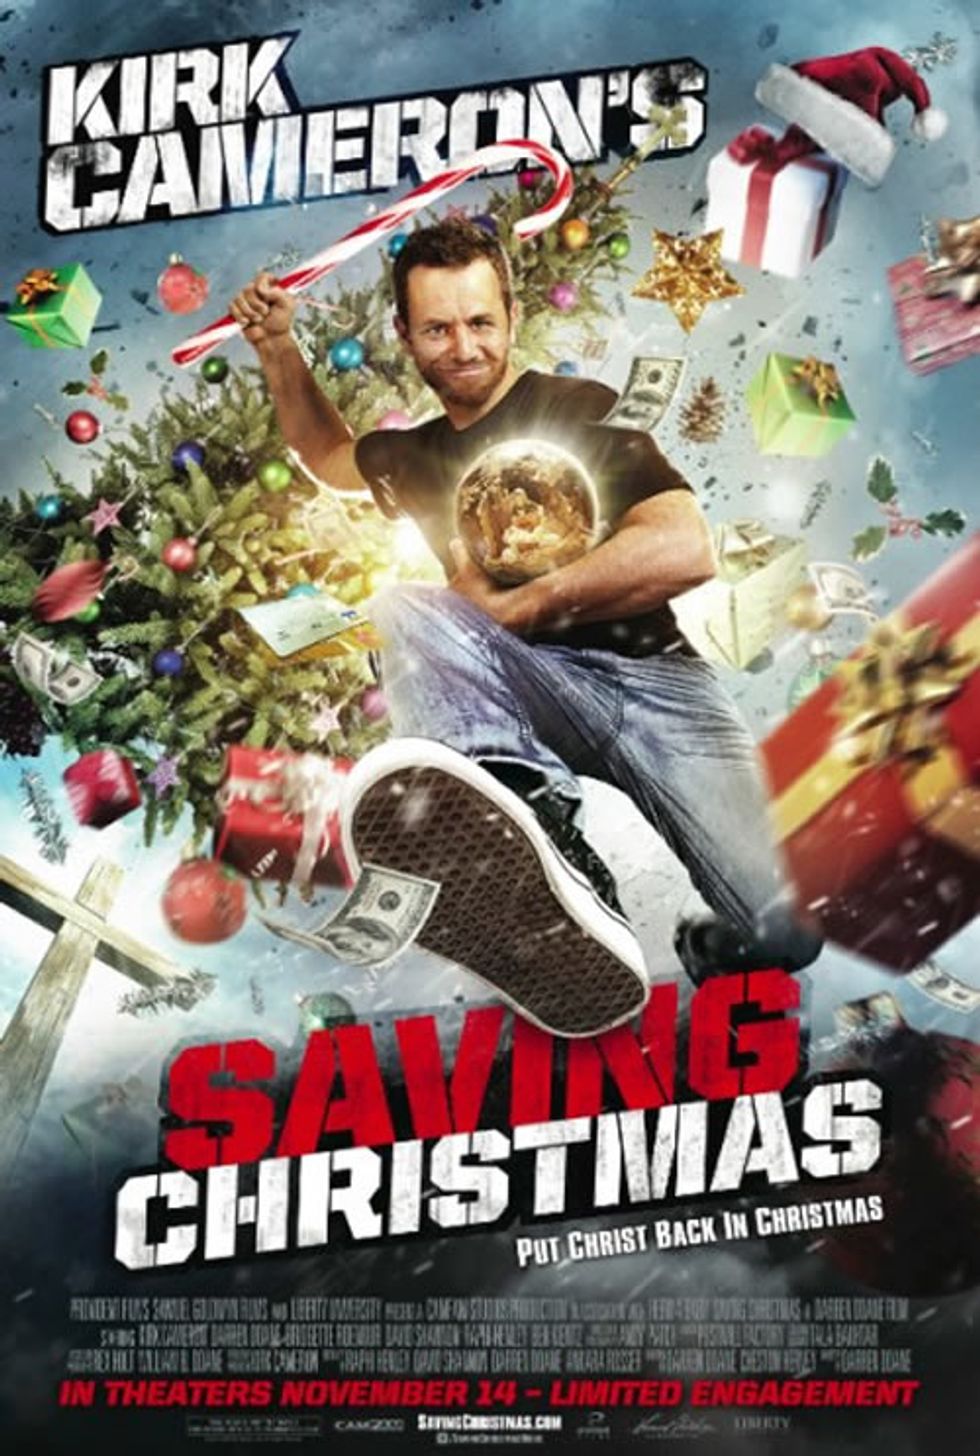 Kirk Cameron's War On Christmas Gets Earlier And Earlier Every Year